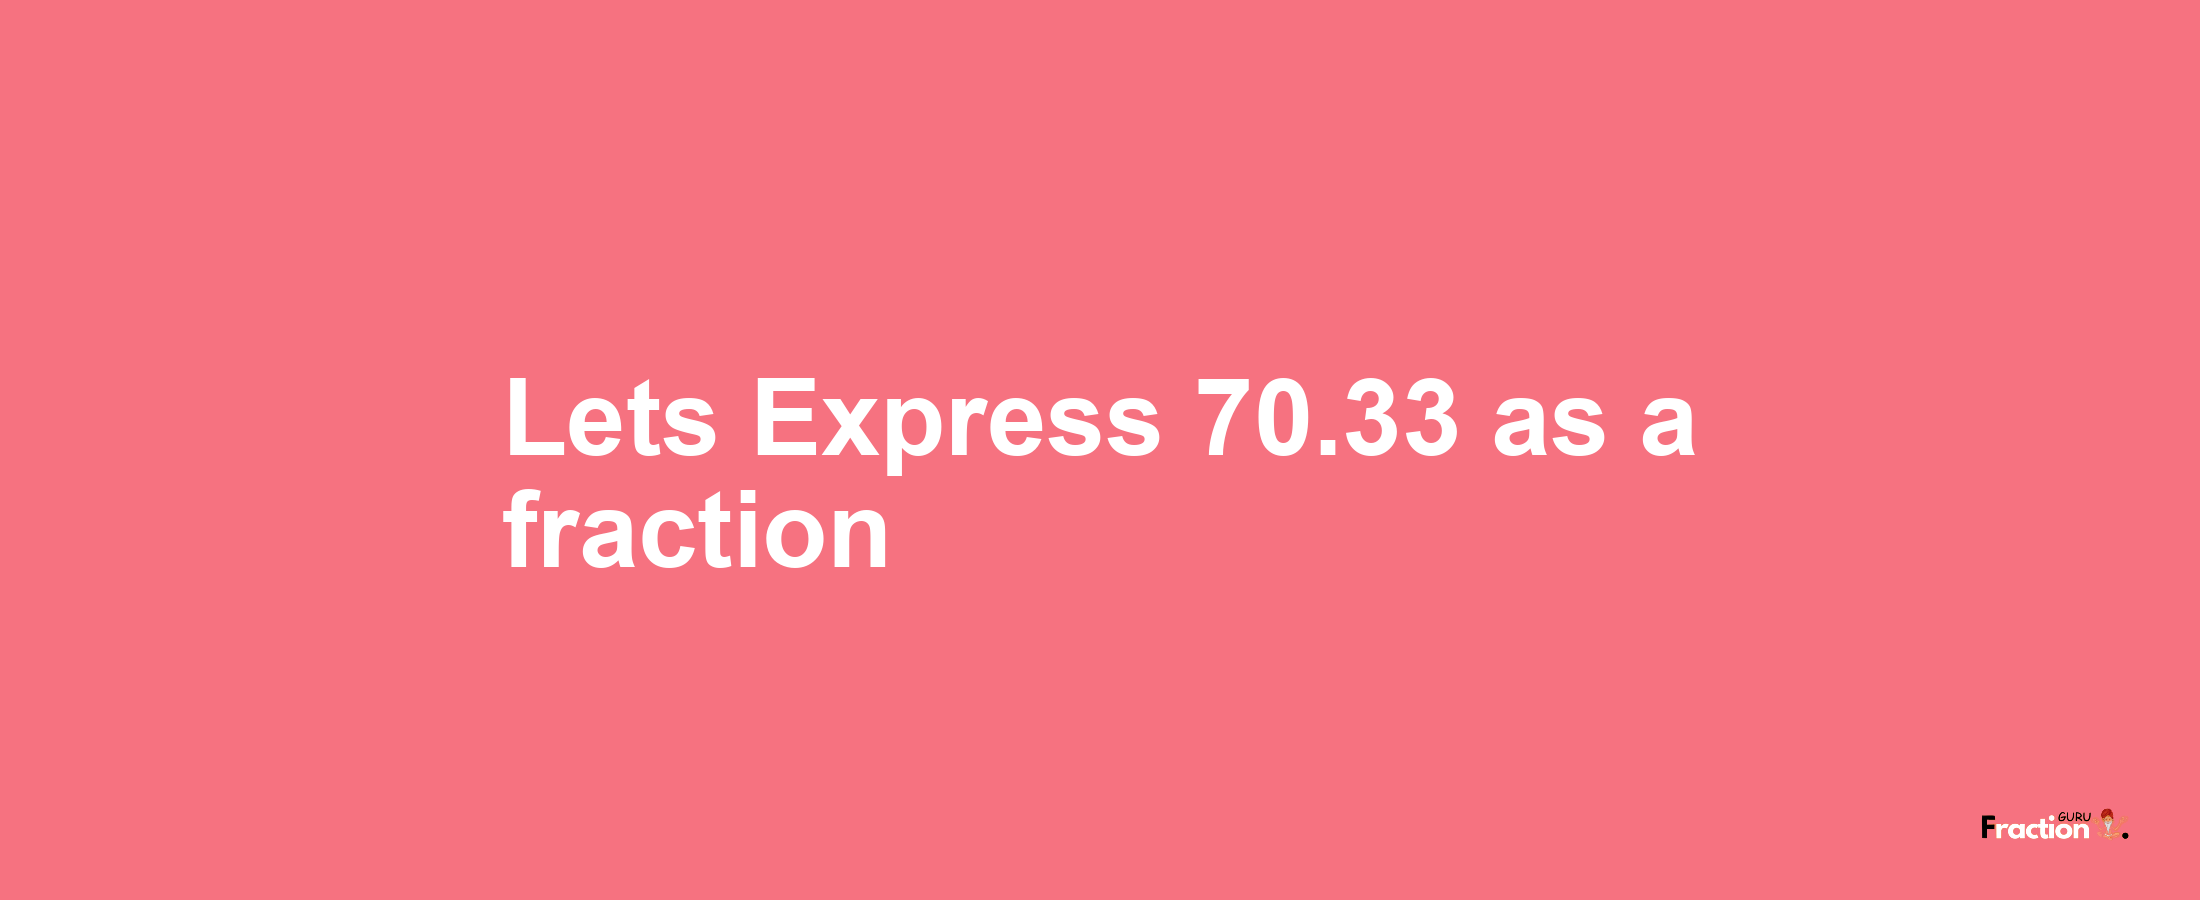 Lets Express 70.33 as afraction